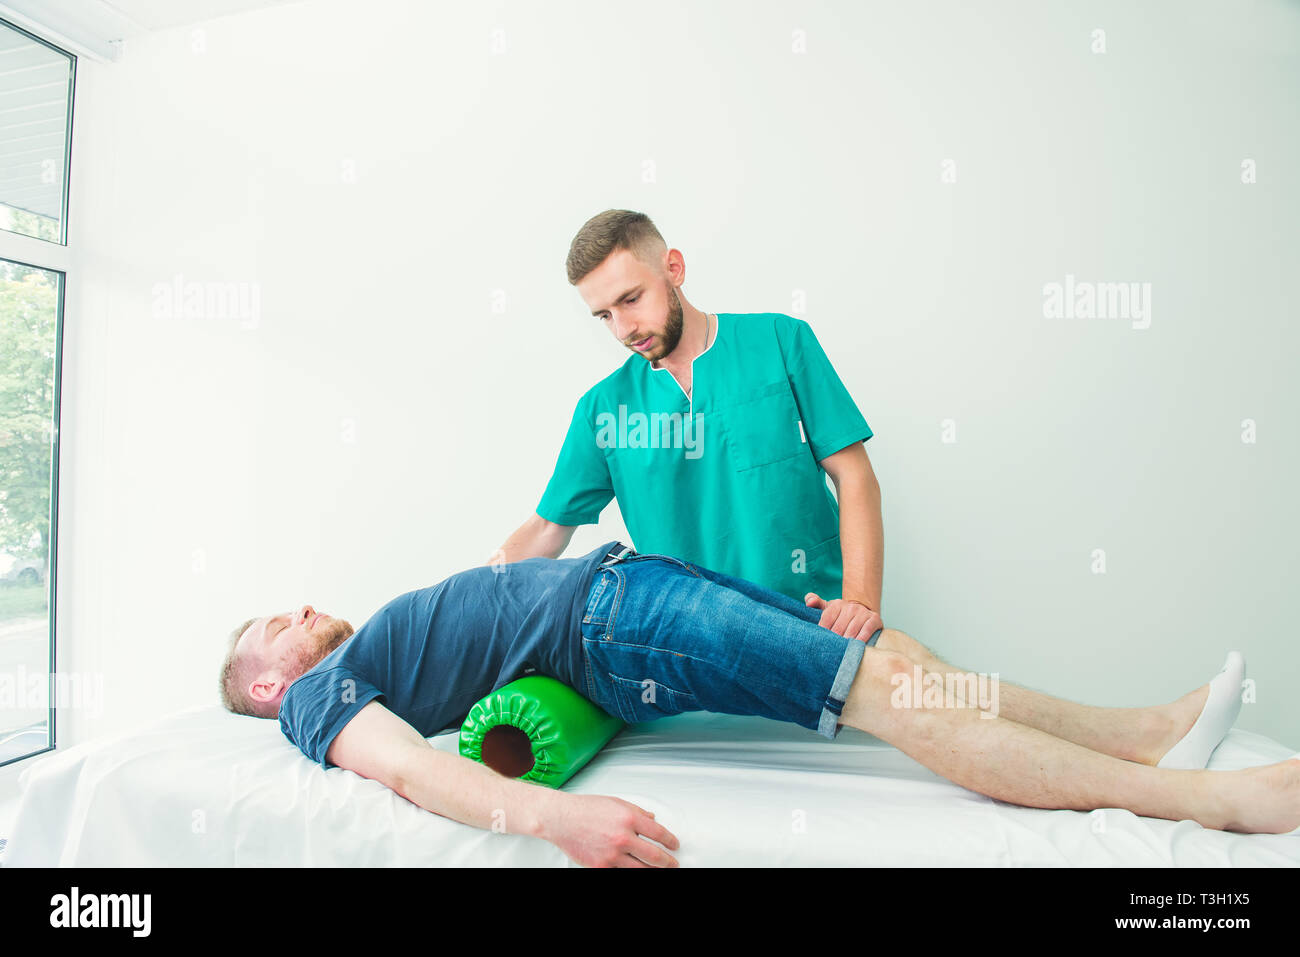 Man at the physiotherapy doing physical exercises with his therapist, they using a massage roll. A chiropractor treats patient's loins spine in medica Stock Photo